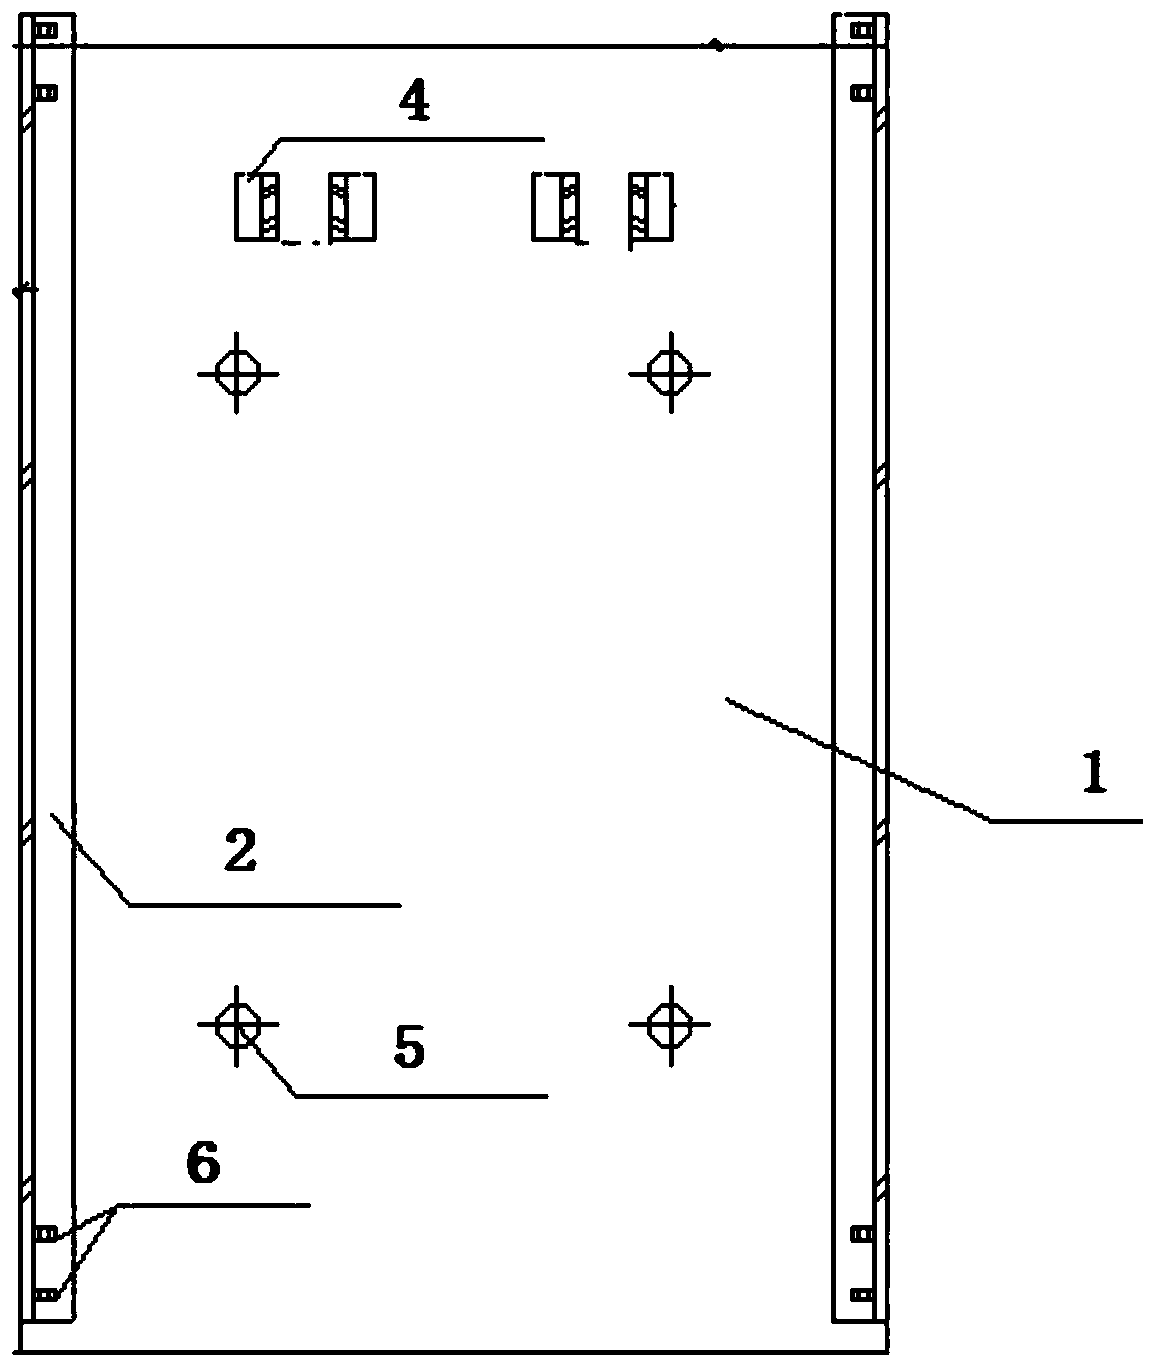 Construction method of assembling high turnover rate steel-coated plywood lightweight formwork system